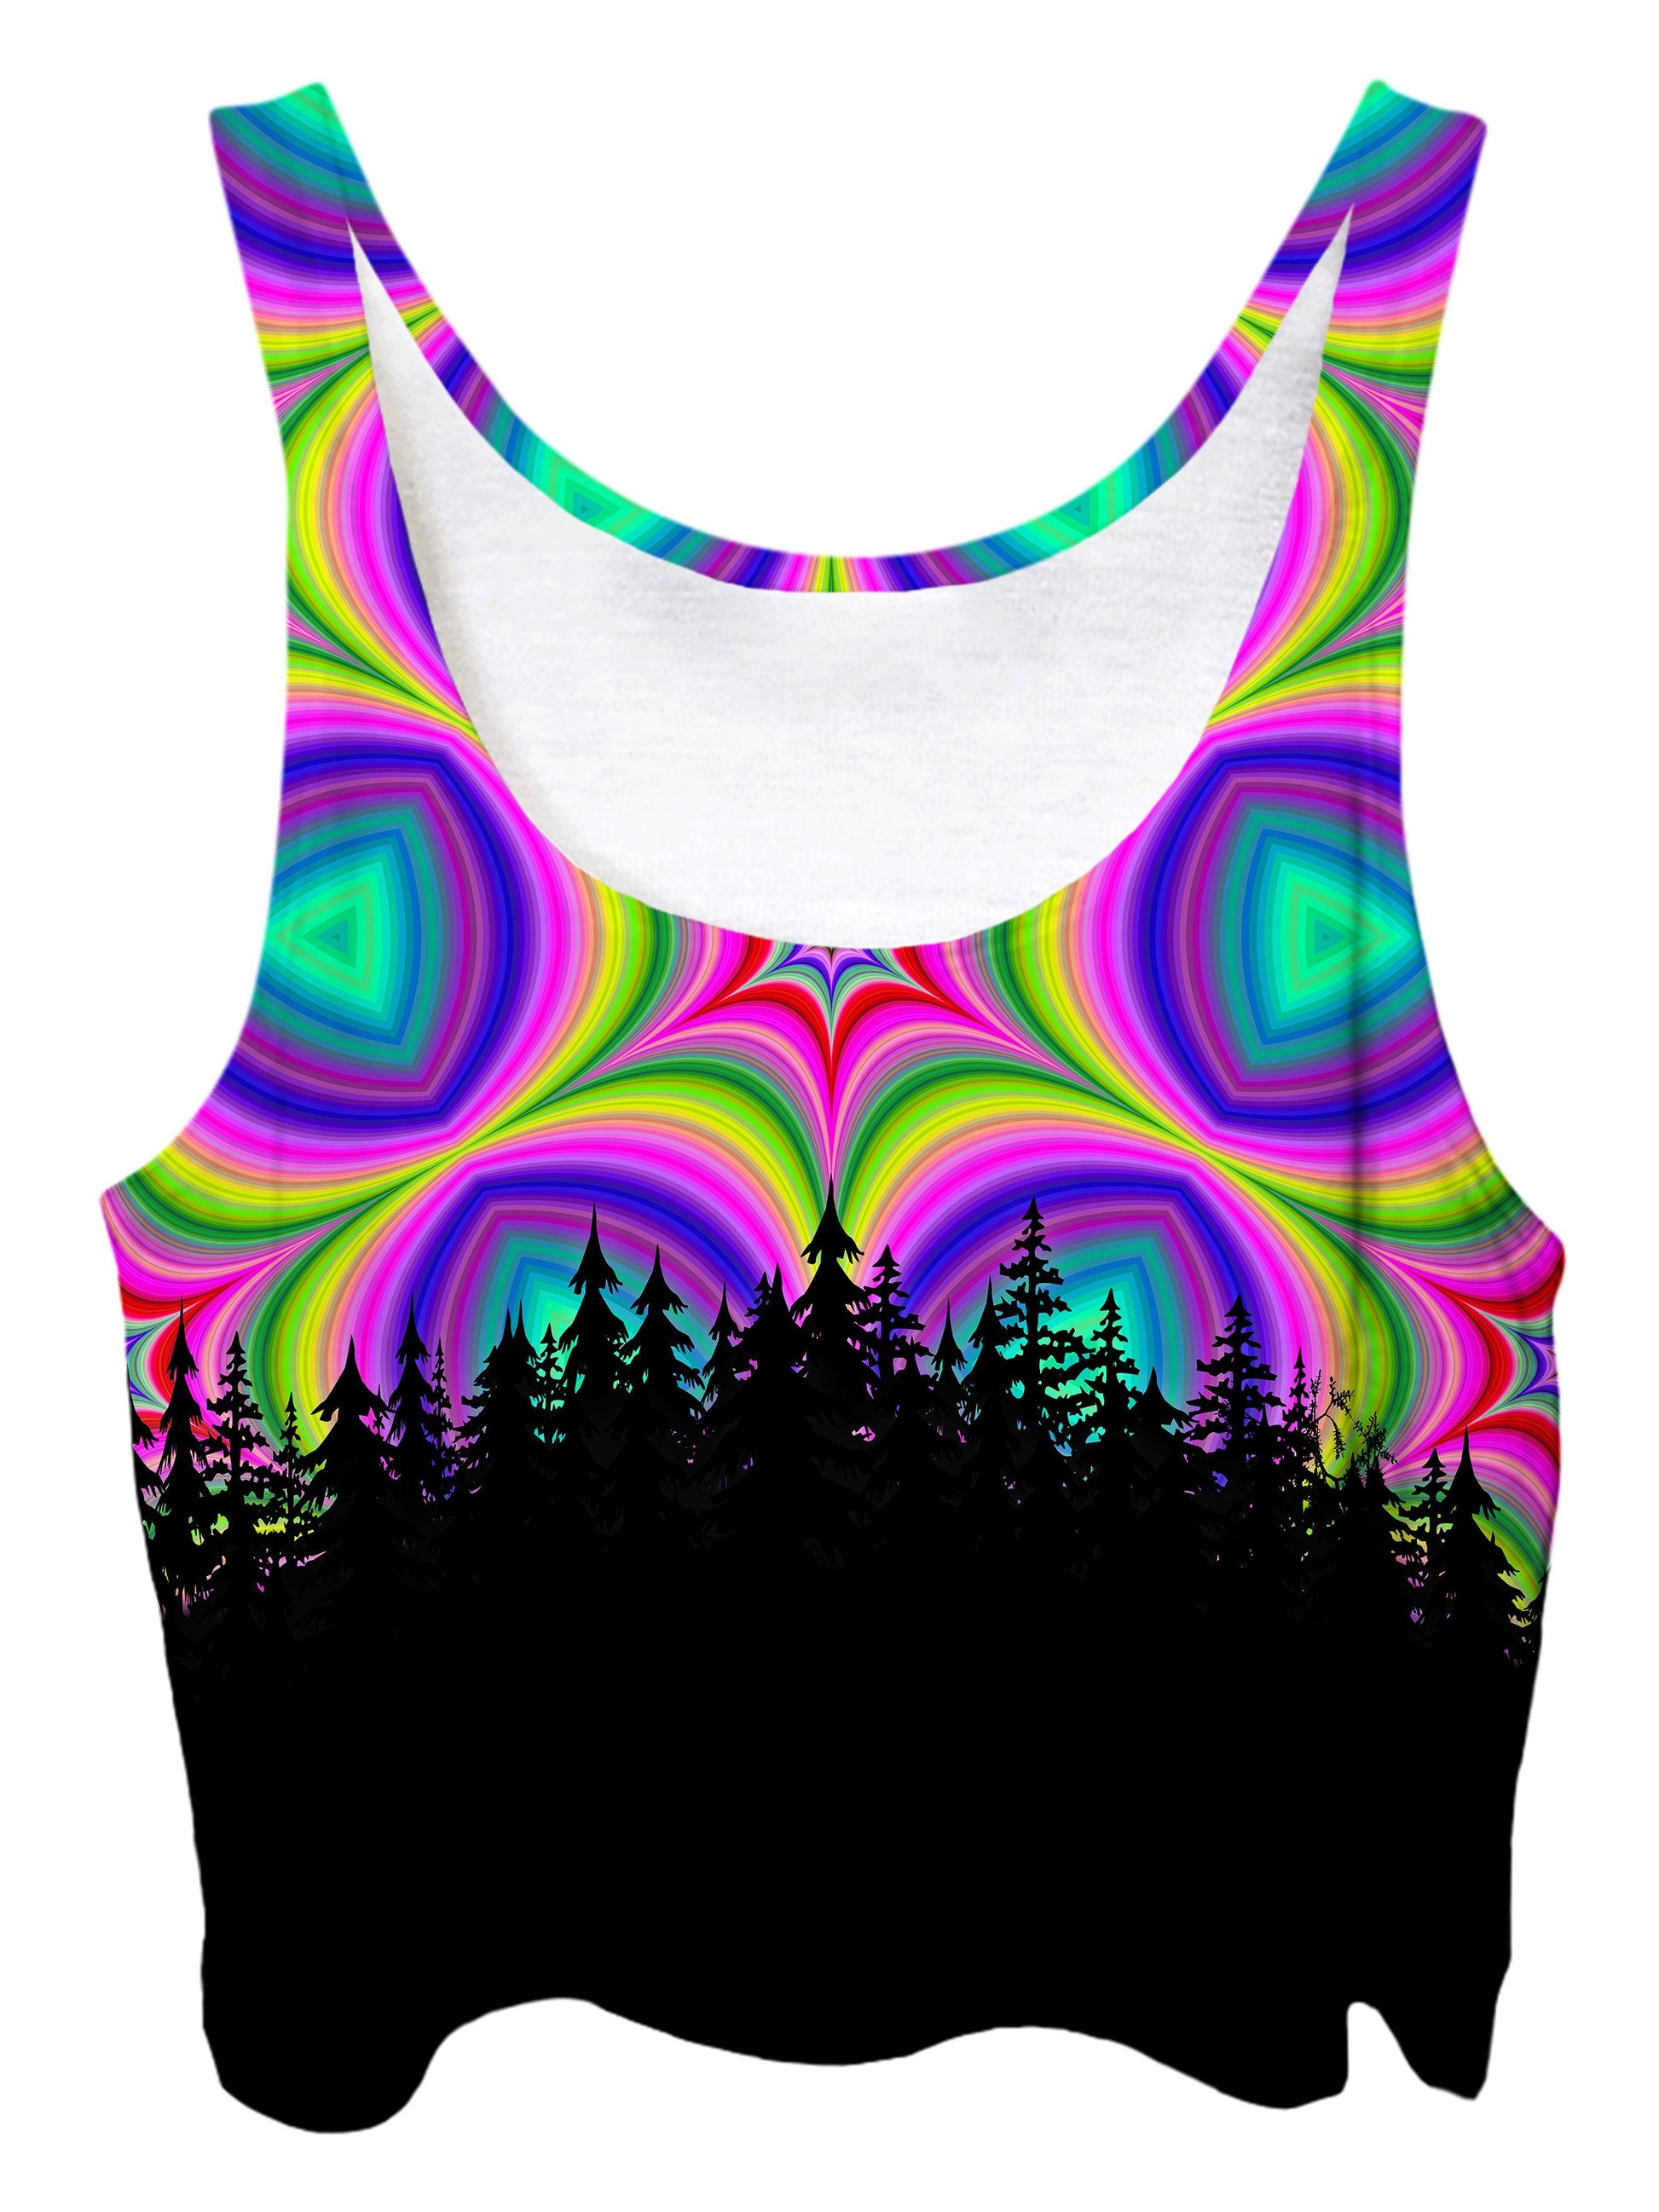 Trippy front view of GratefullyDyed Apparel rainbow & black star mandala forest crop top.